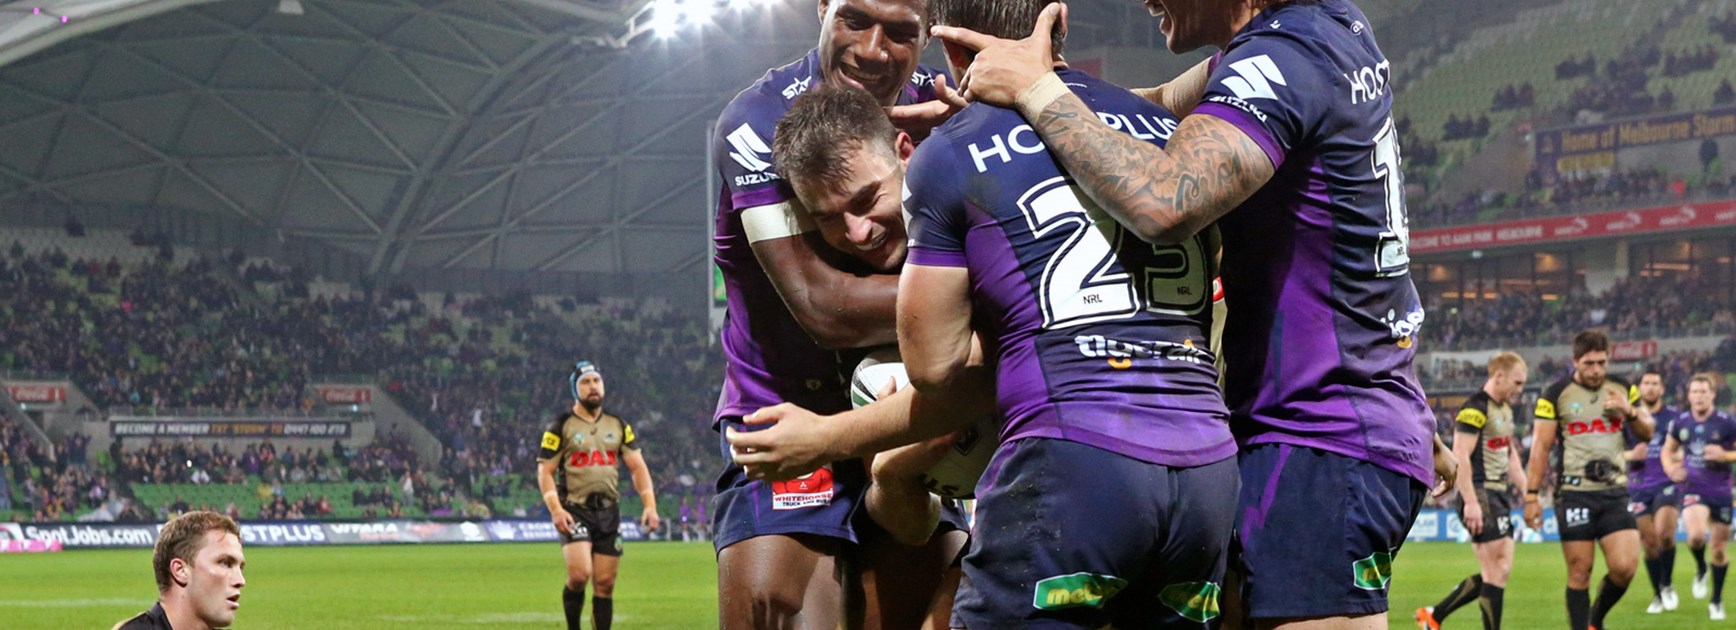 Storm players celebrate against the Panthers in Round 13.